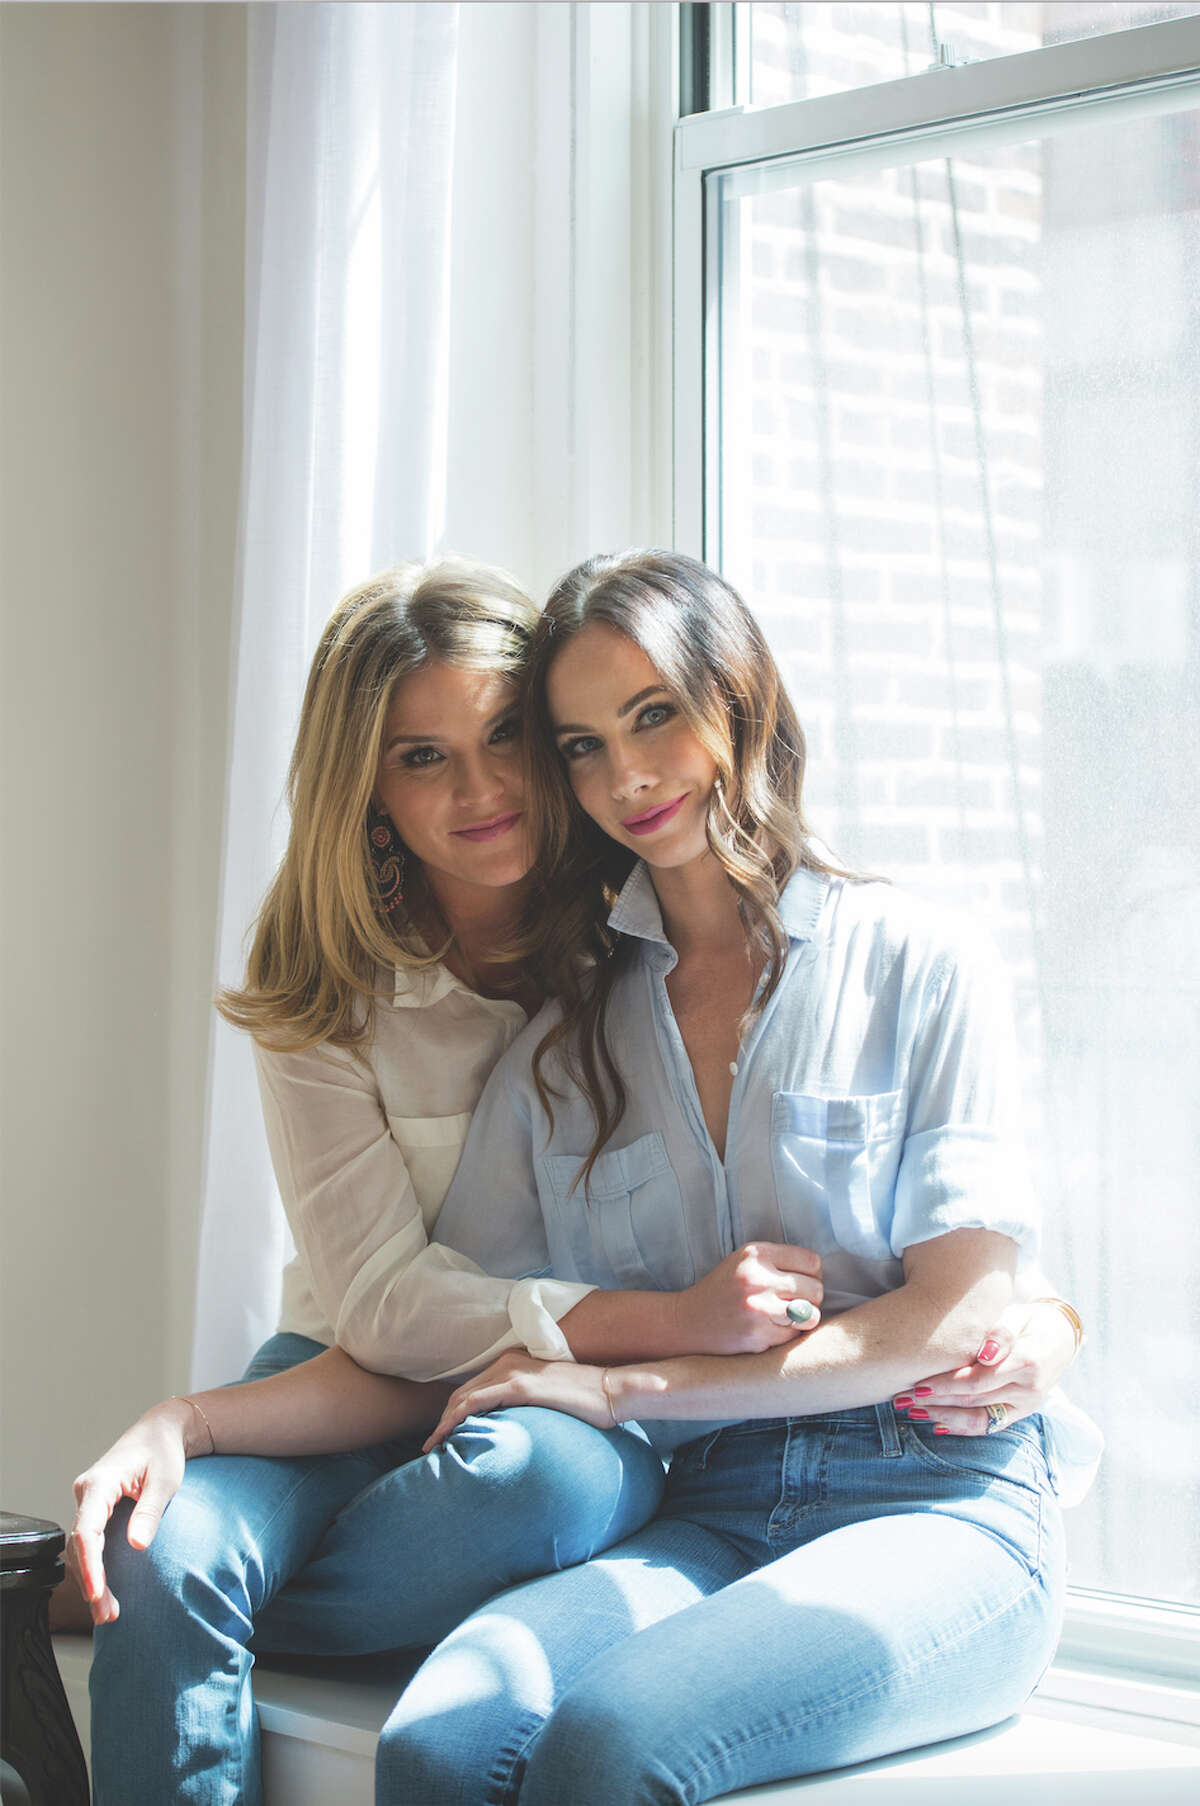 Bush daughters visit Houston on book tour for 'Love Comes First'